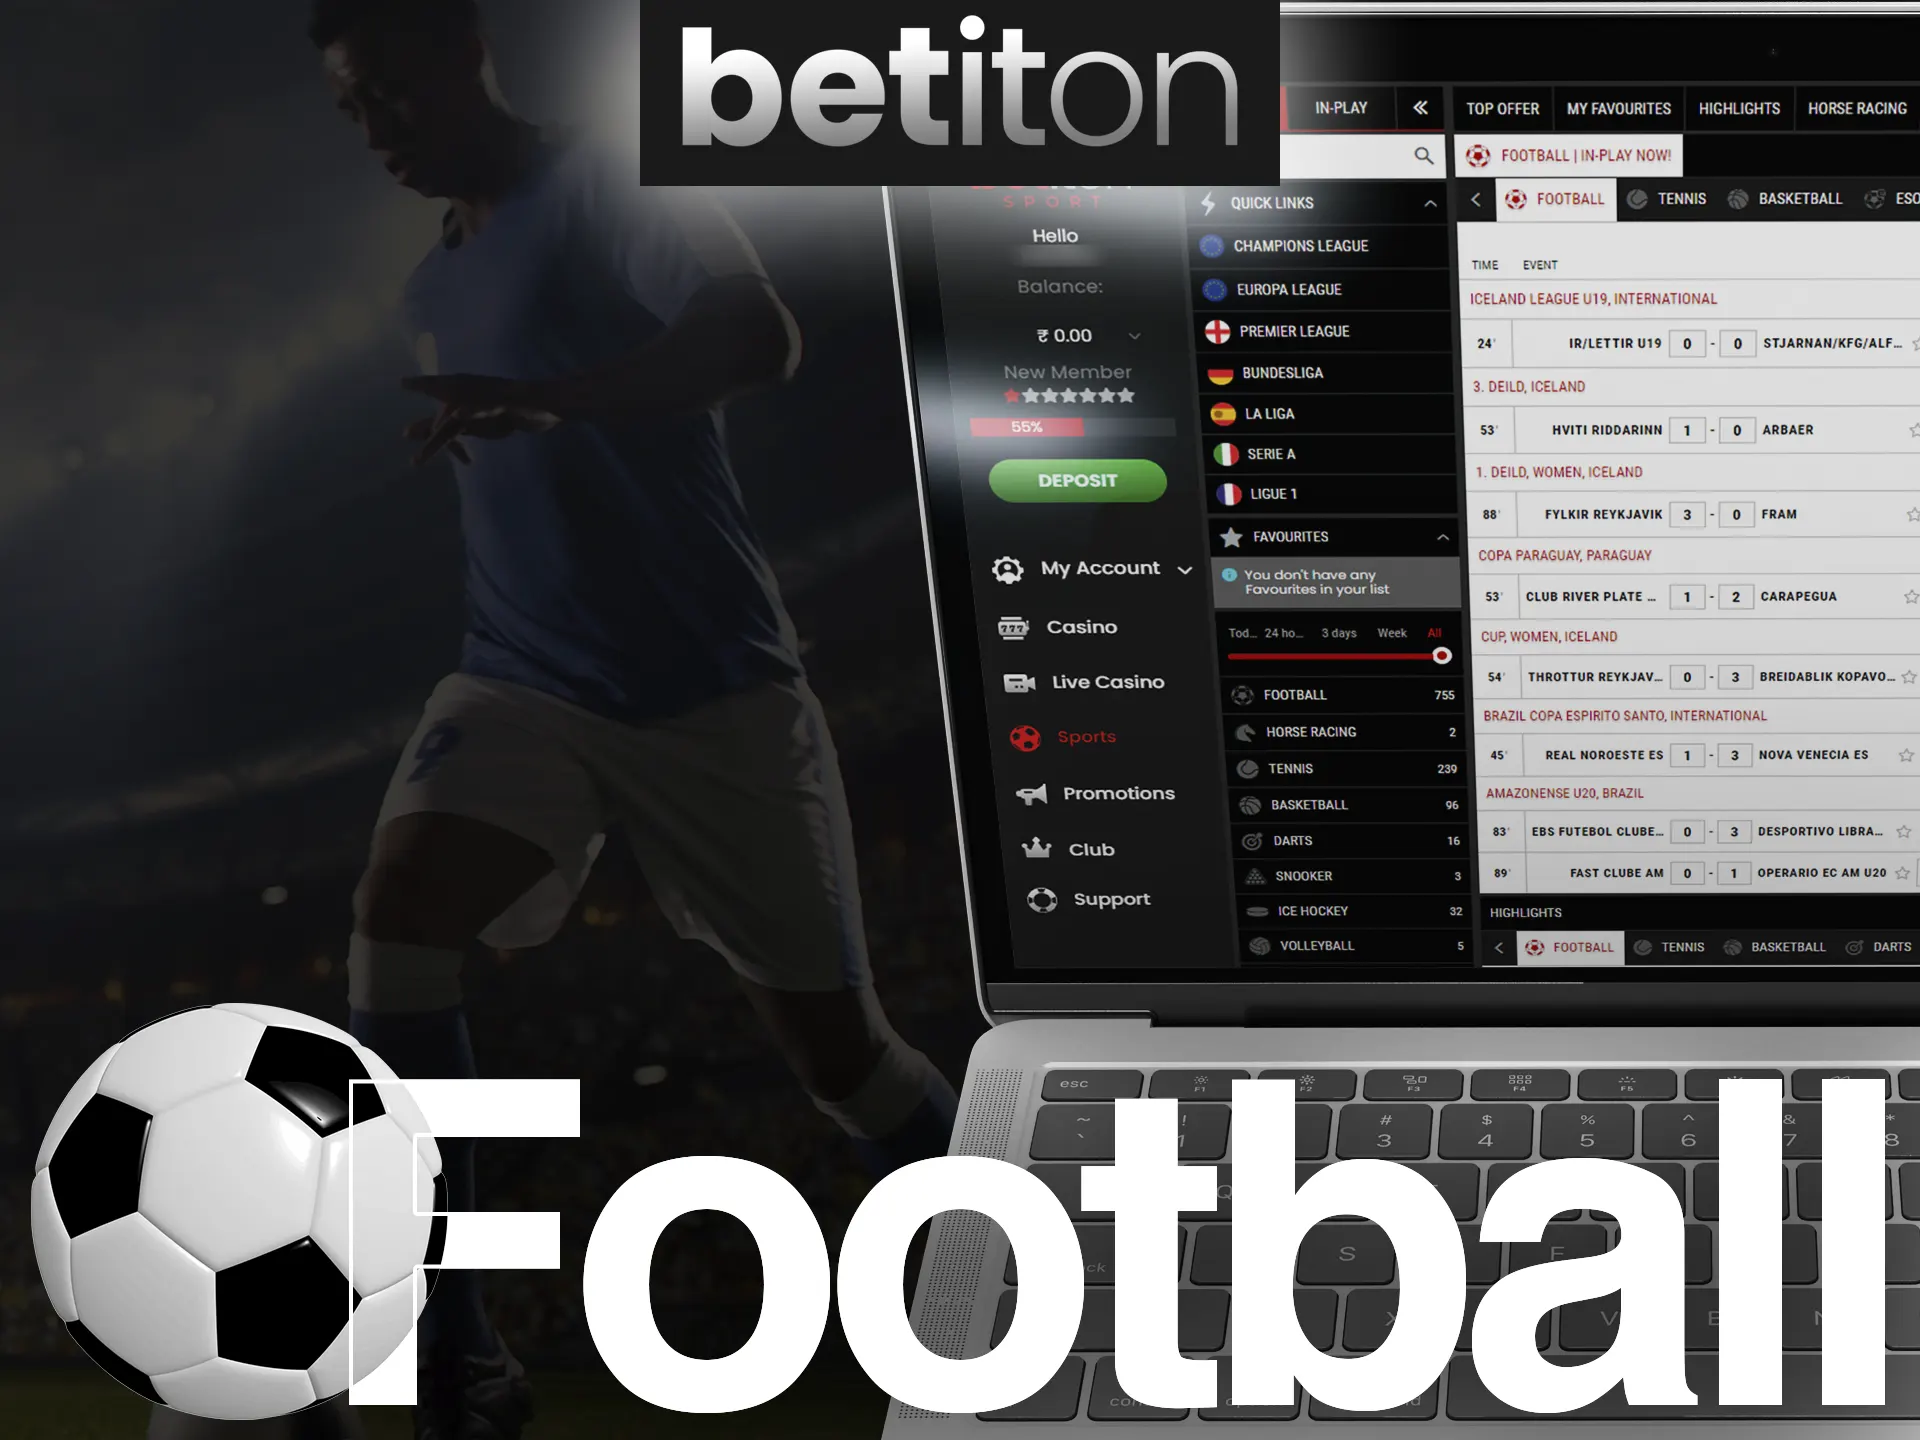 Bet on football matches on the special Betiton page.